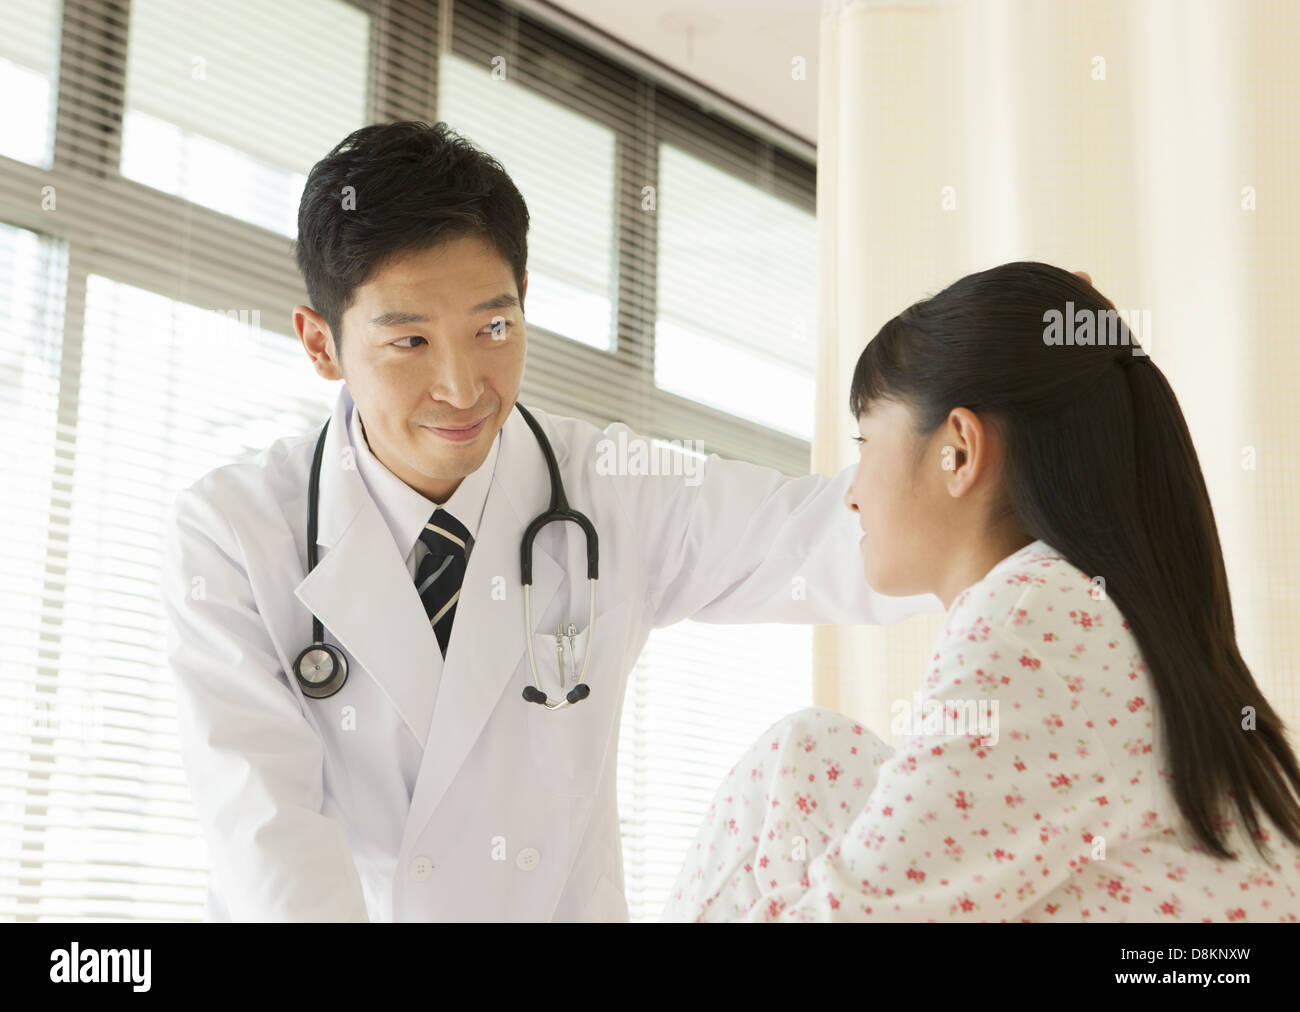 Girl and doctor Stock Photo